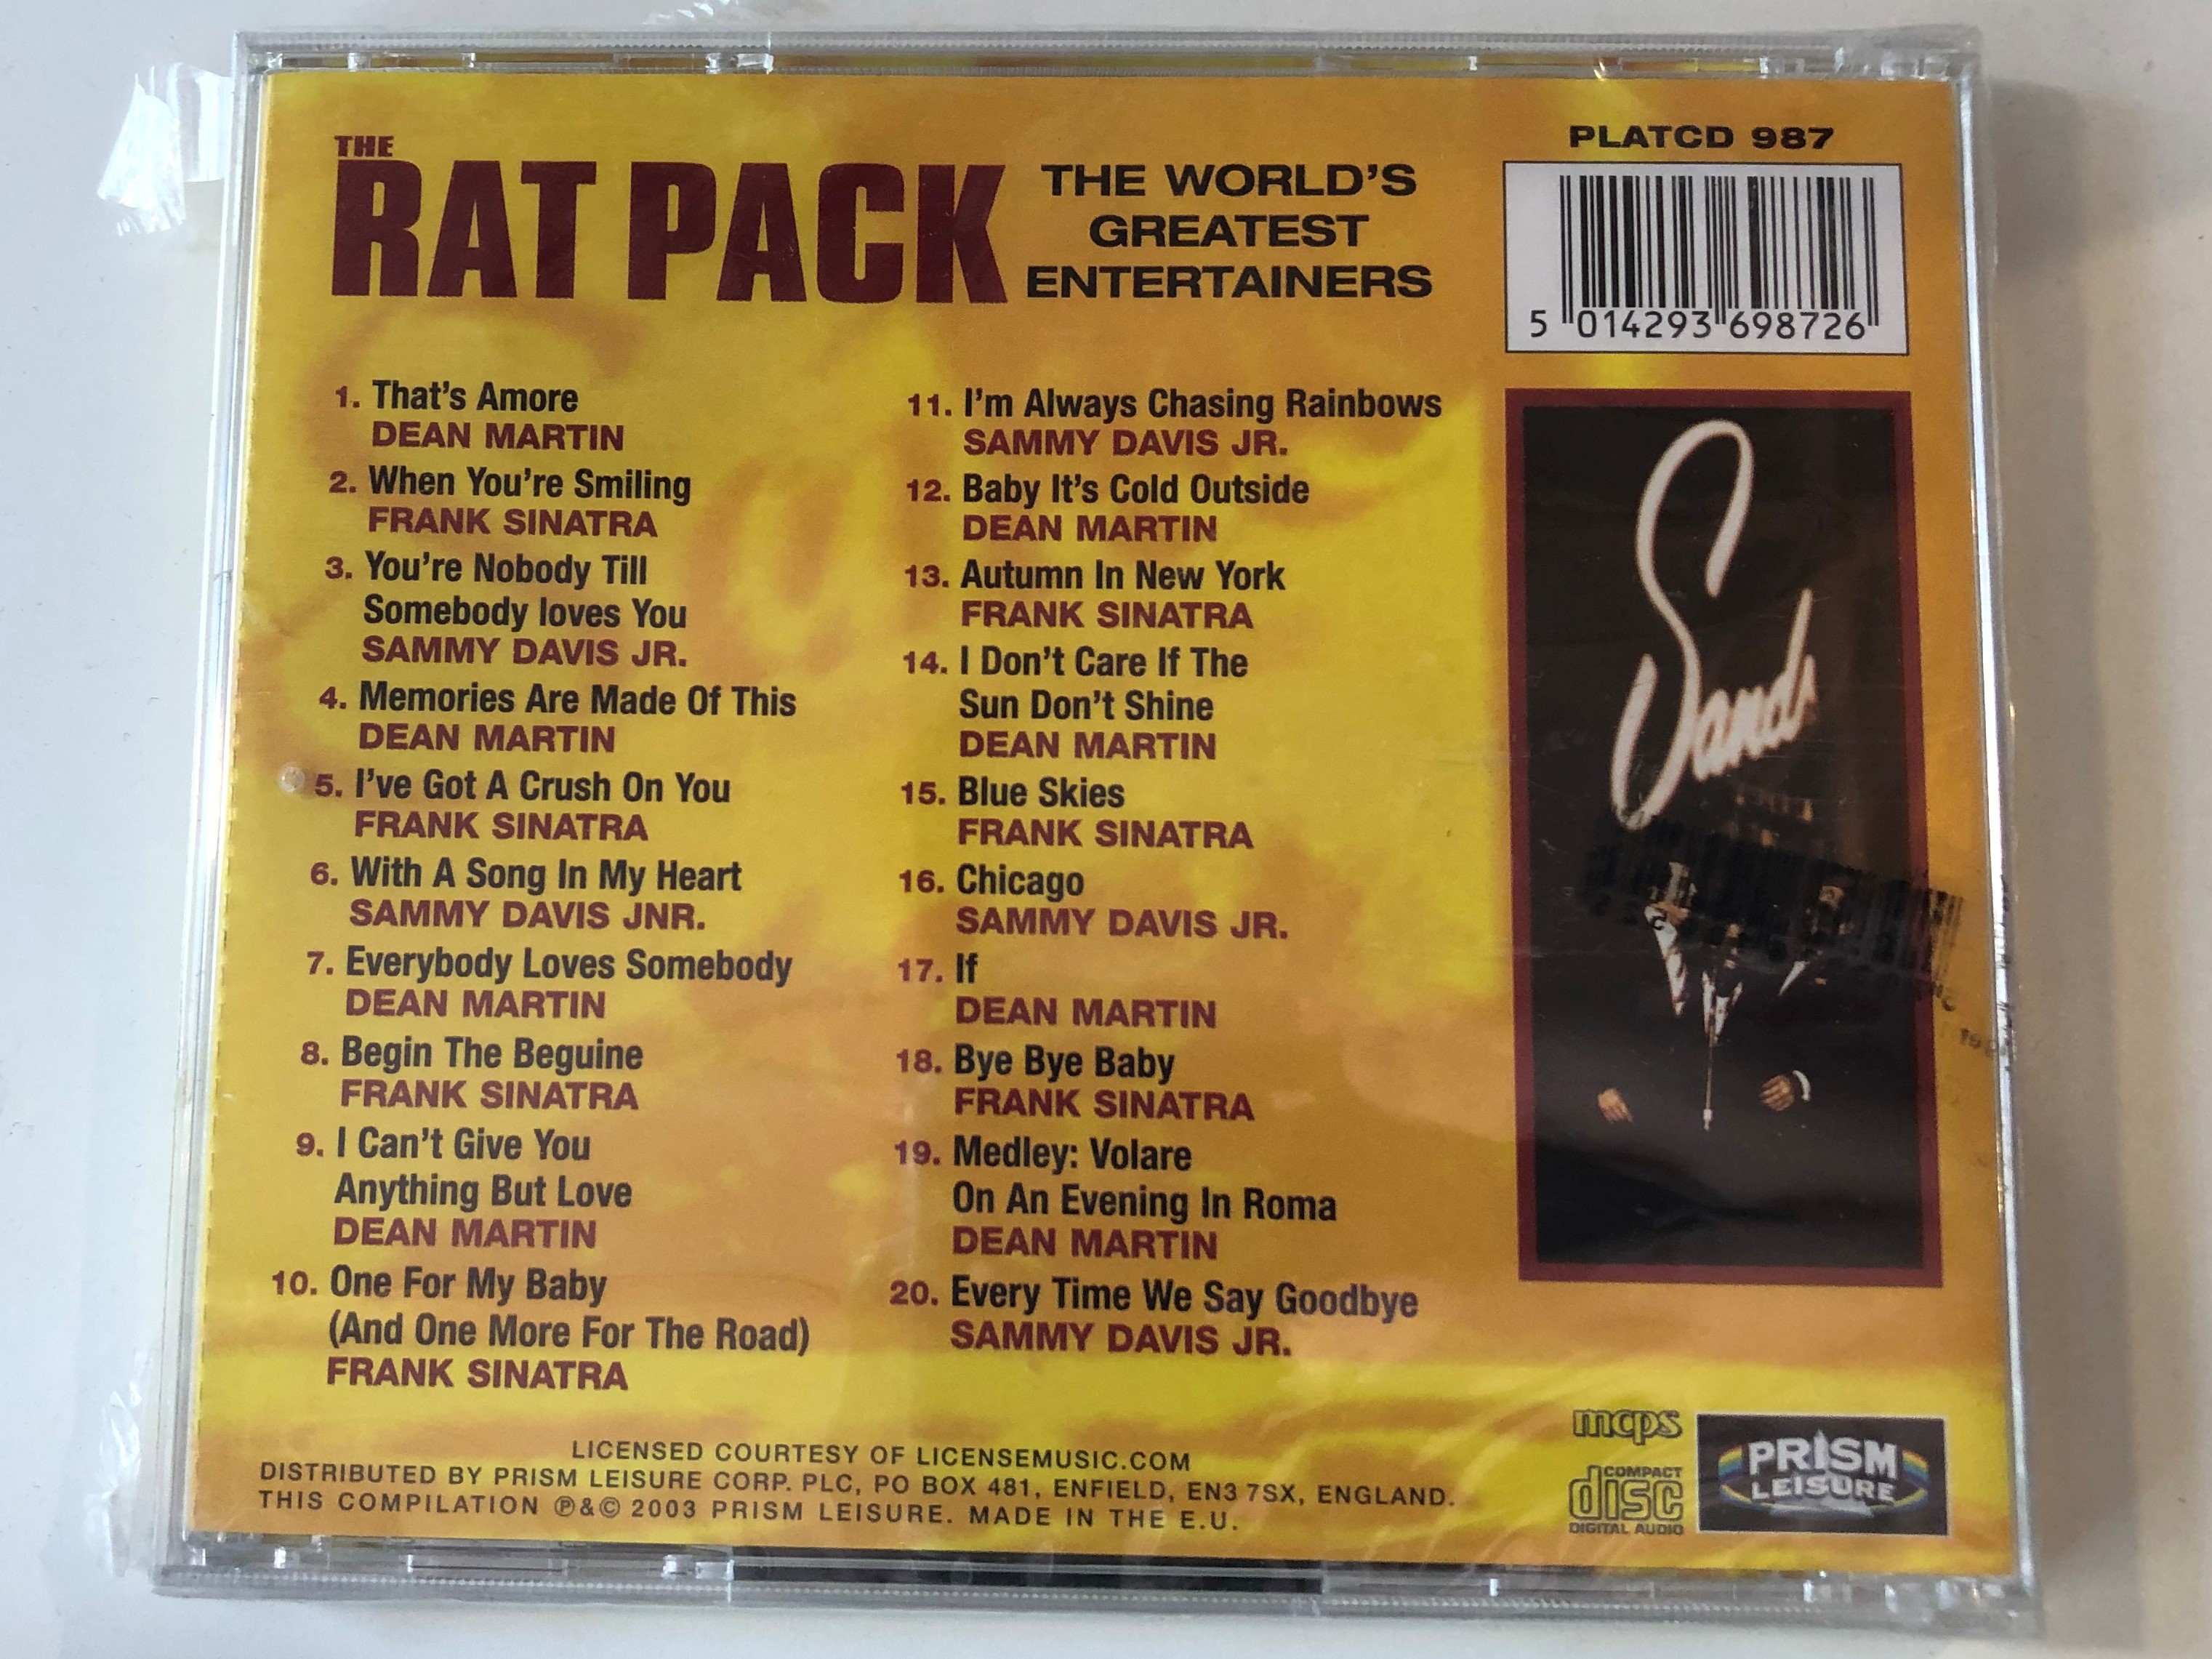 dean-martin-frank-sinatra-sammy-davis-jr.-the-rat-pack-20-songs-from-the-world-s-greatest-entertainers-the-kings-of-cool-prism-leisure-audio-cd-2003-platcd-987-2-.jpg